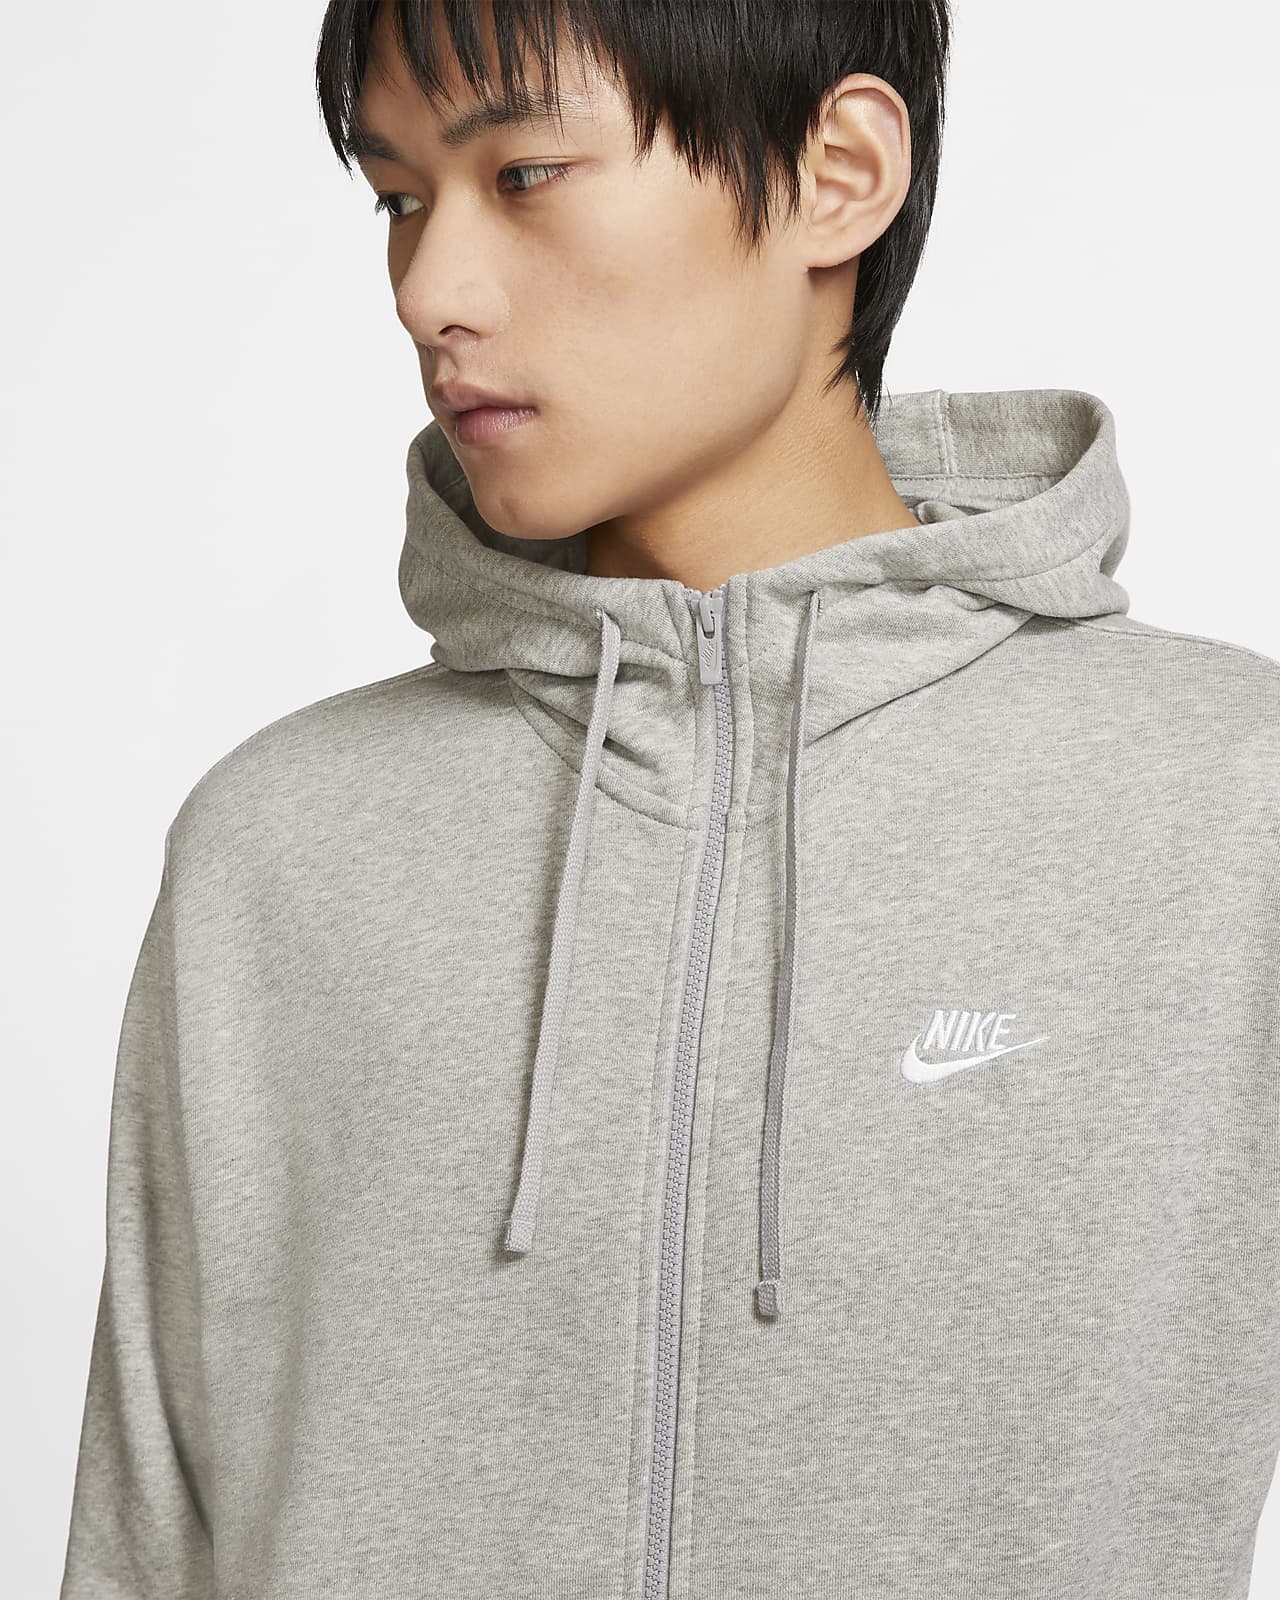 https://static.nike.com/a/images/t_PDP_1280_v1/f_auto,q_auto:eco/feicmx0zabomadiwnvuc/sweat-a-capuche-a-zip-sportswear-club-pour-26zWR3.png